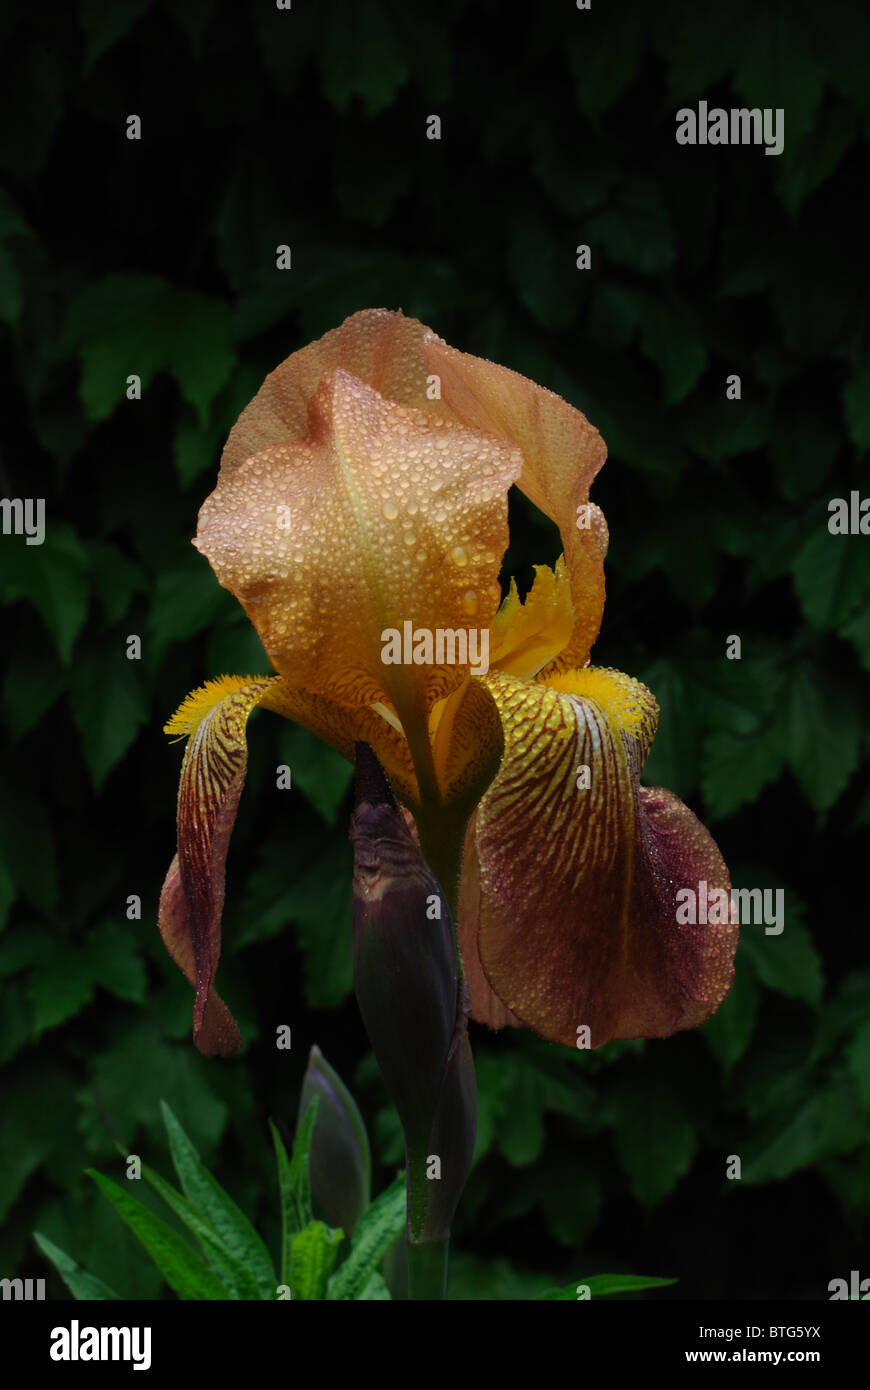 A gold and yellow bearded iris against a dark background Stock Photo